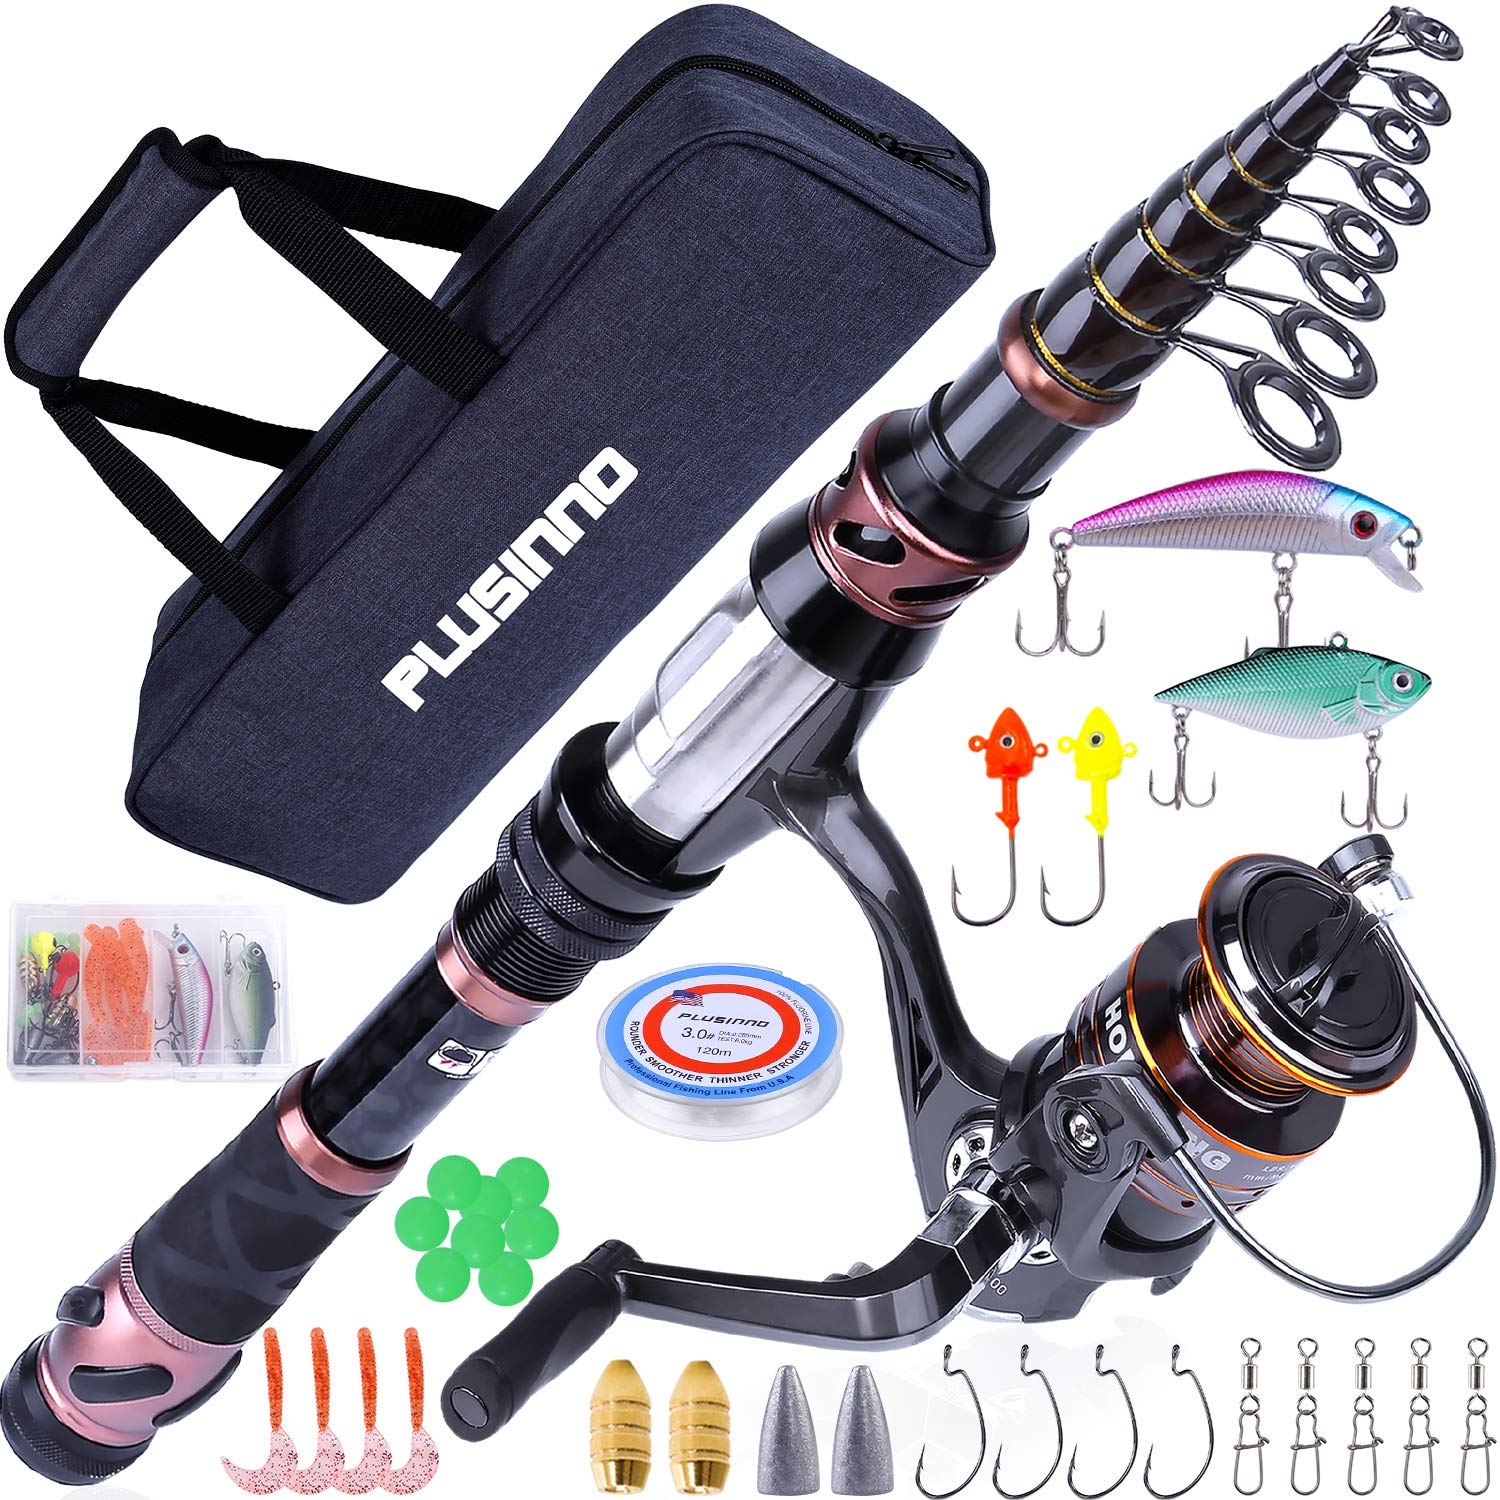 PLUSINNO Fishing Rod and Reel Combos - Carbon Fiber Telescopic Fishing Pole  - Spinning Reel 12 +1